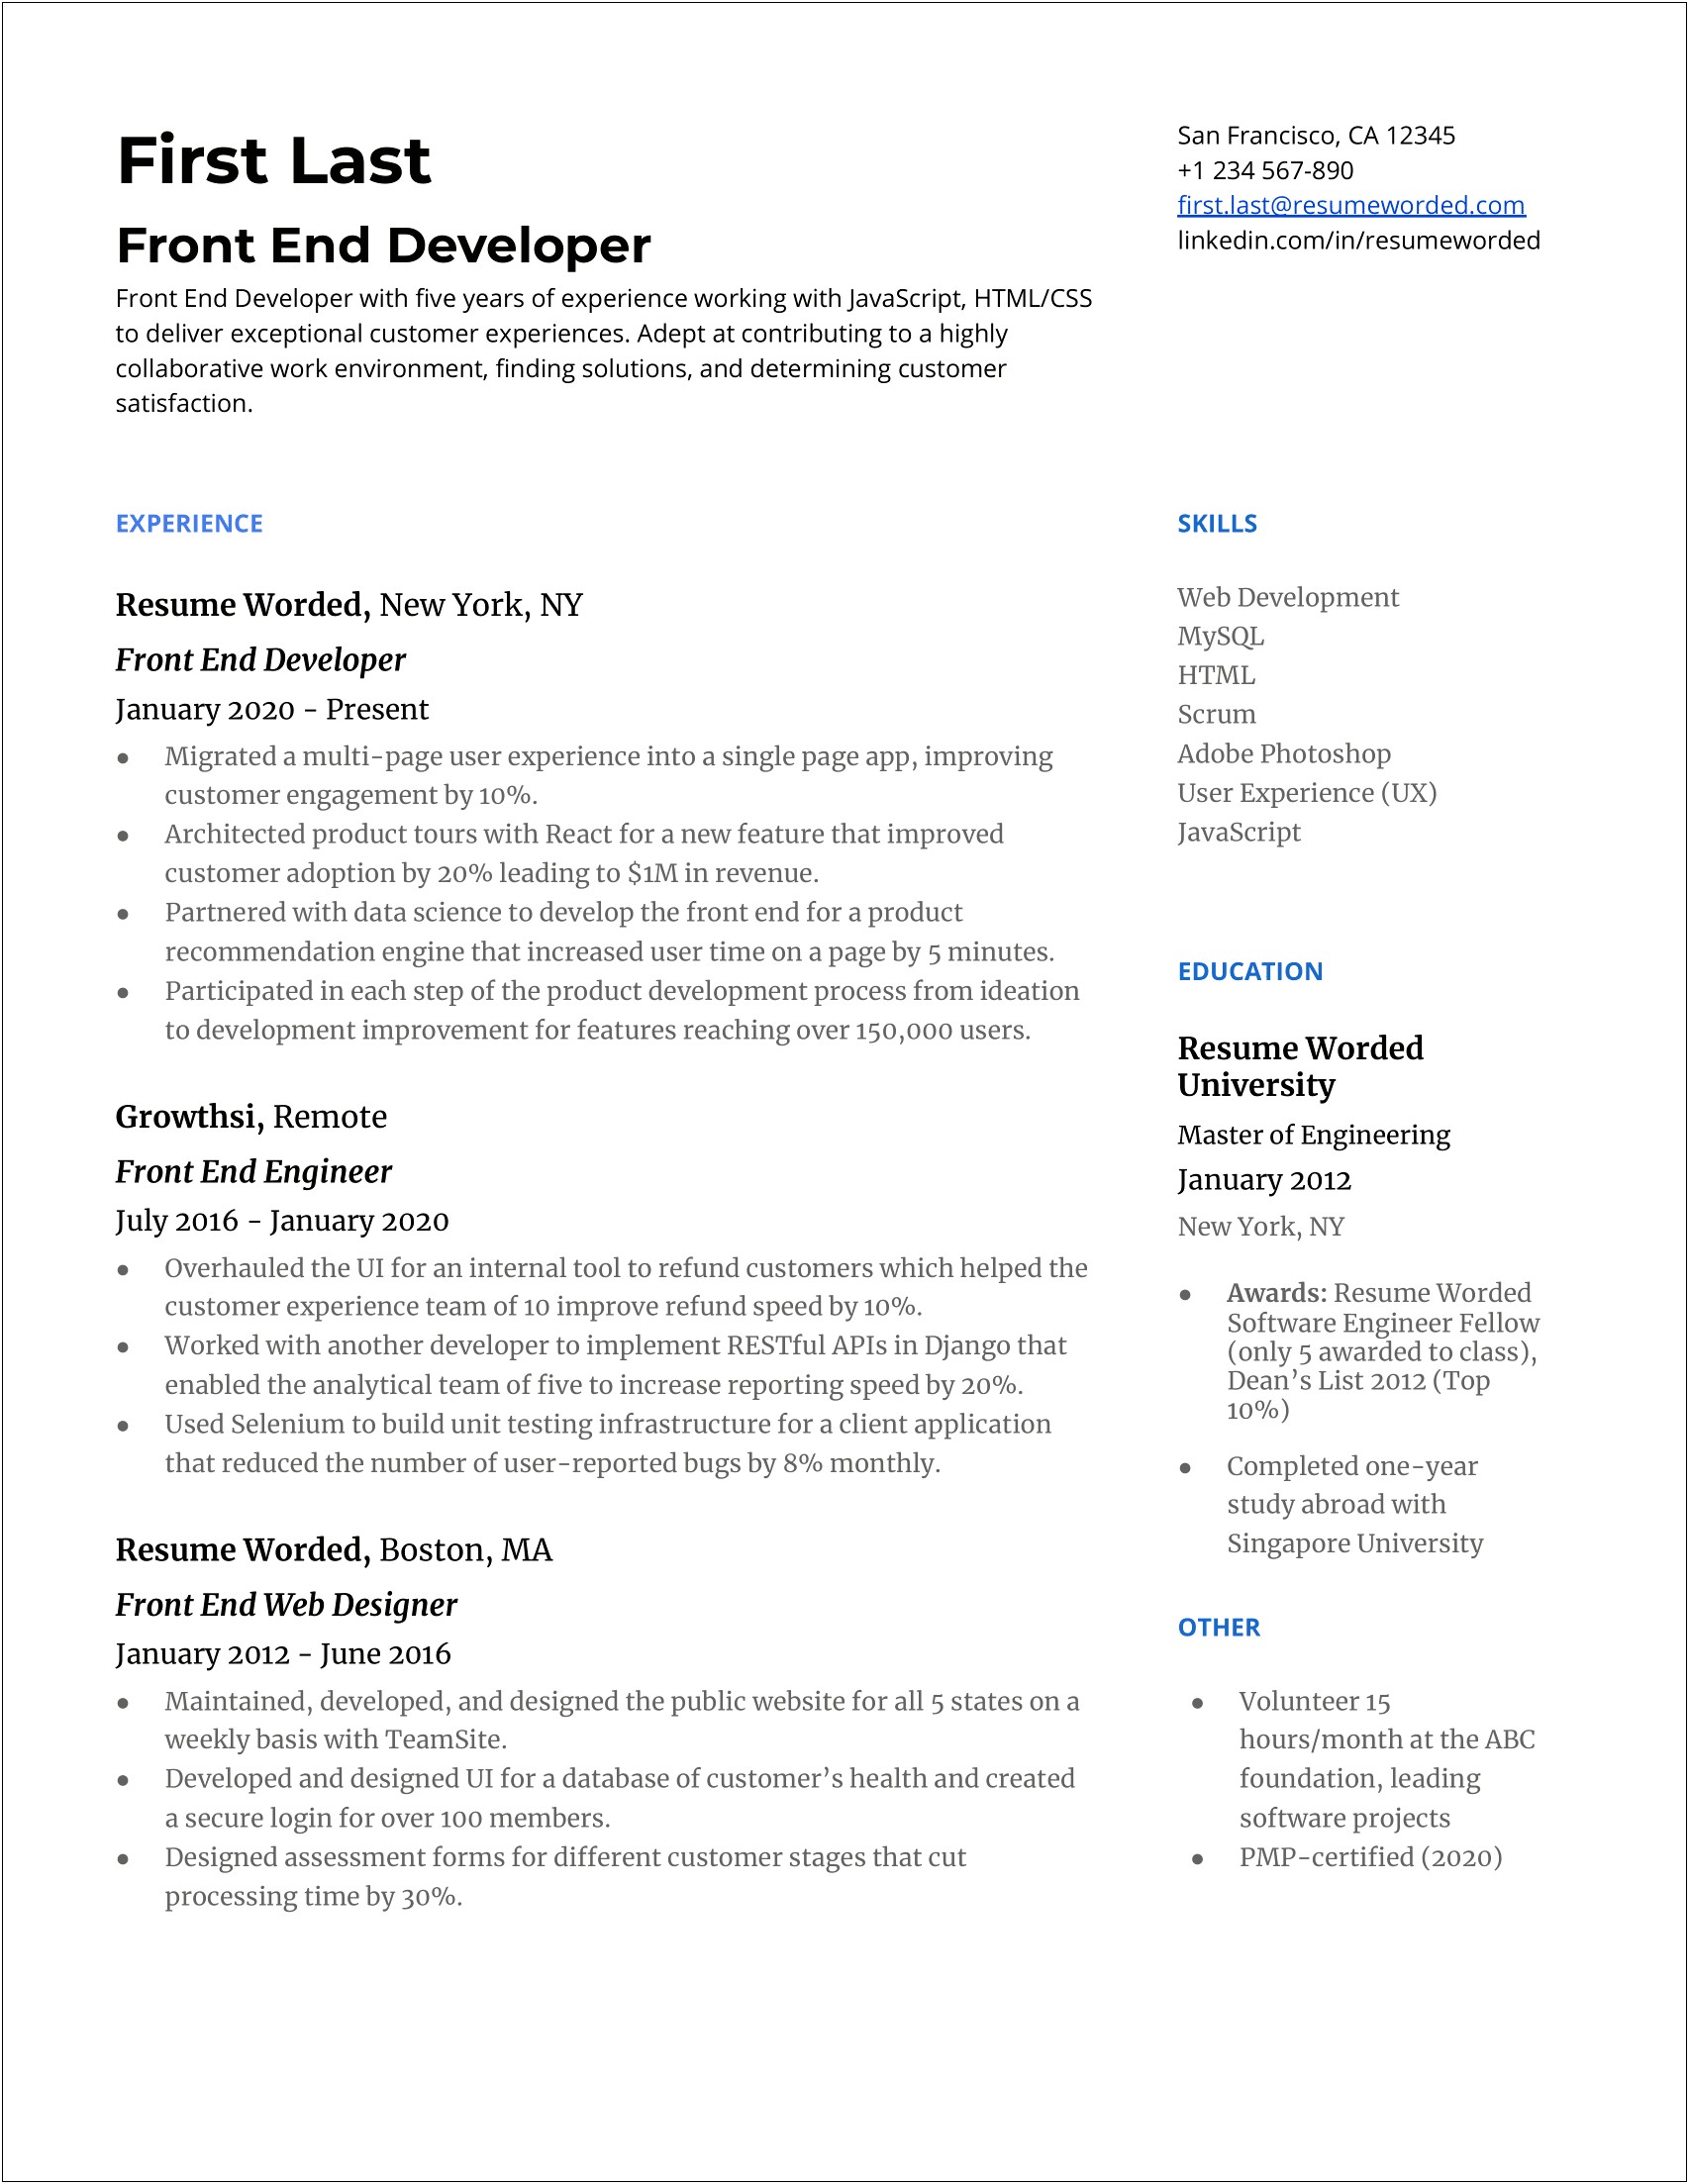 Related Experience And Other Experience On Resume